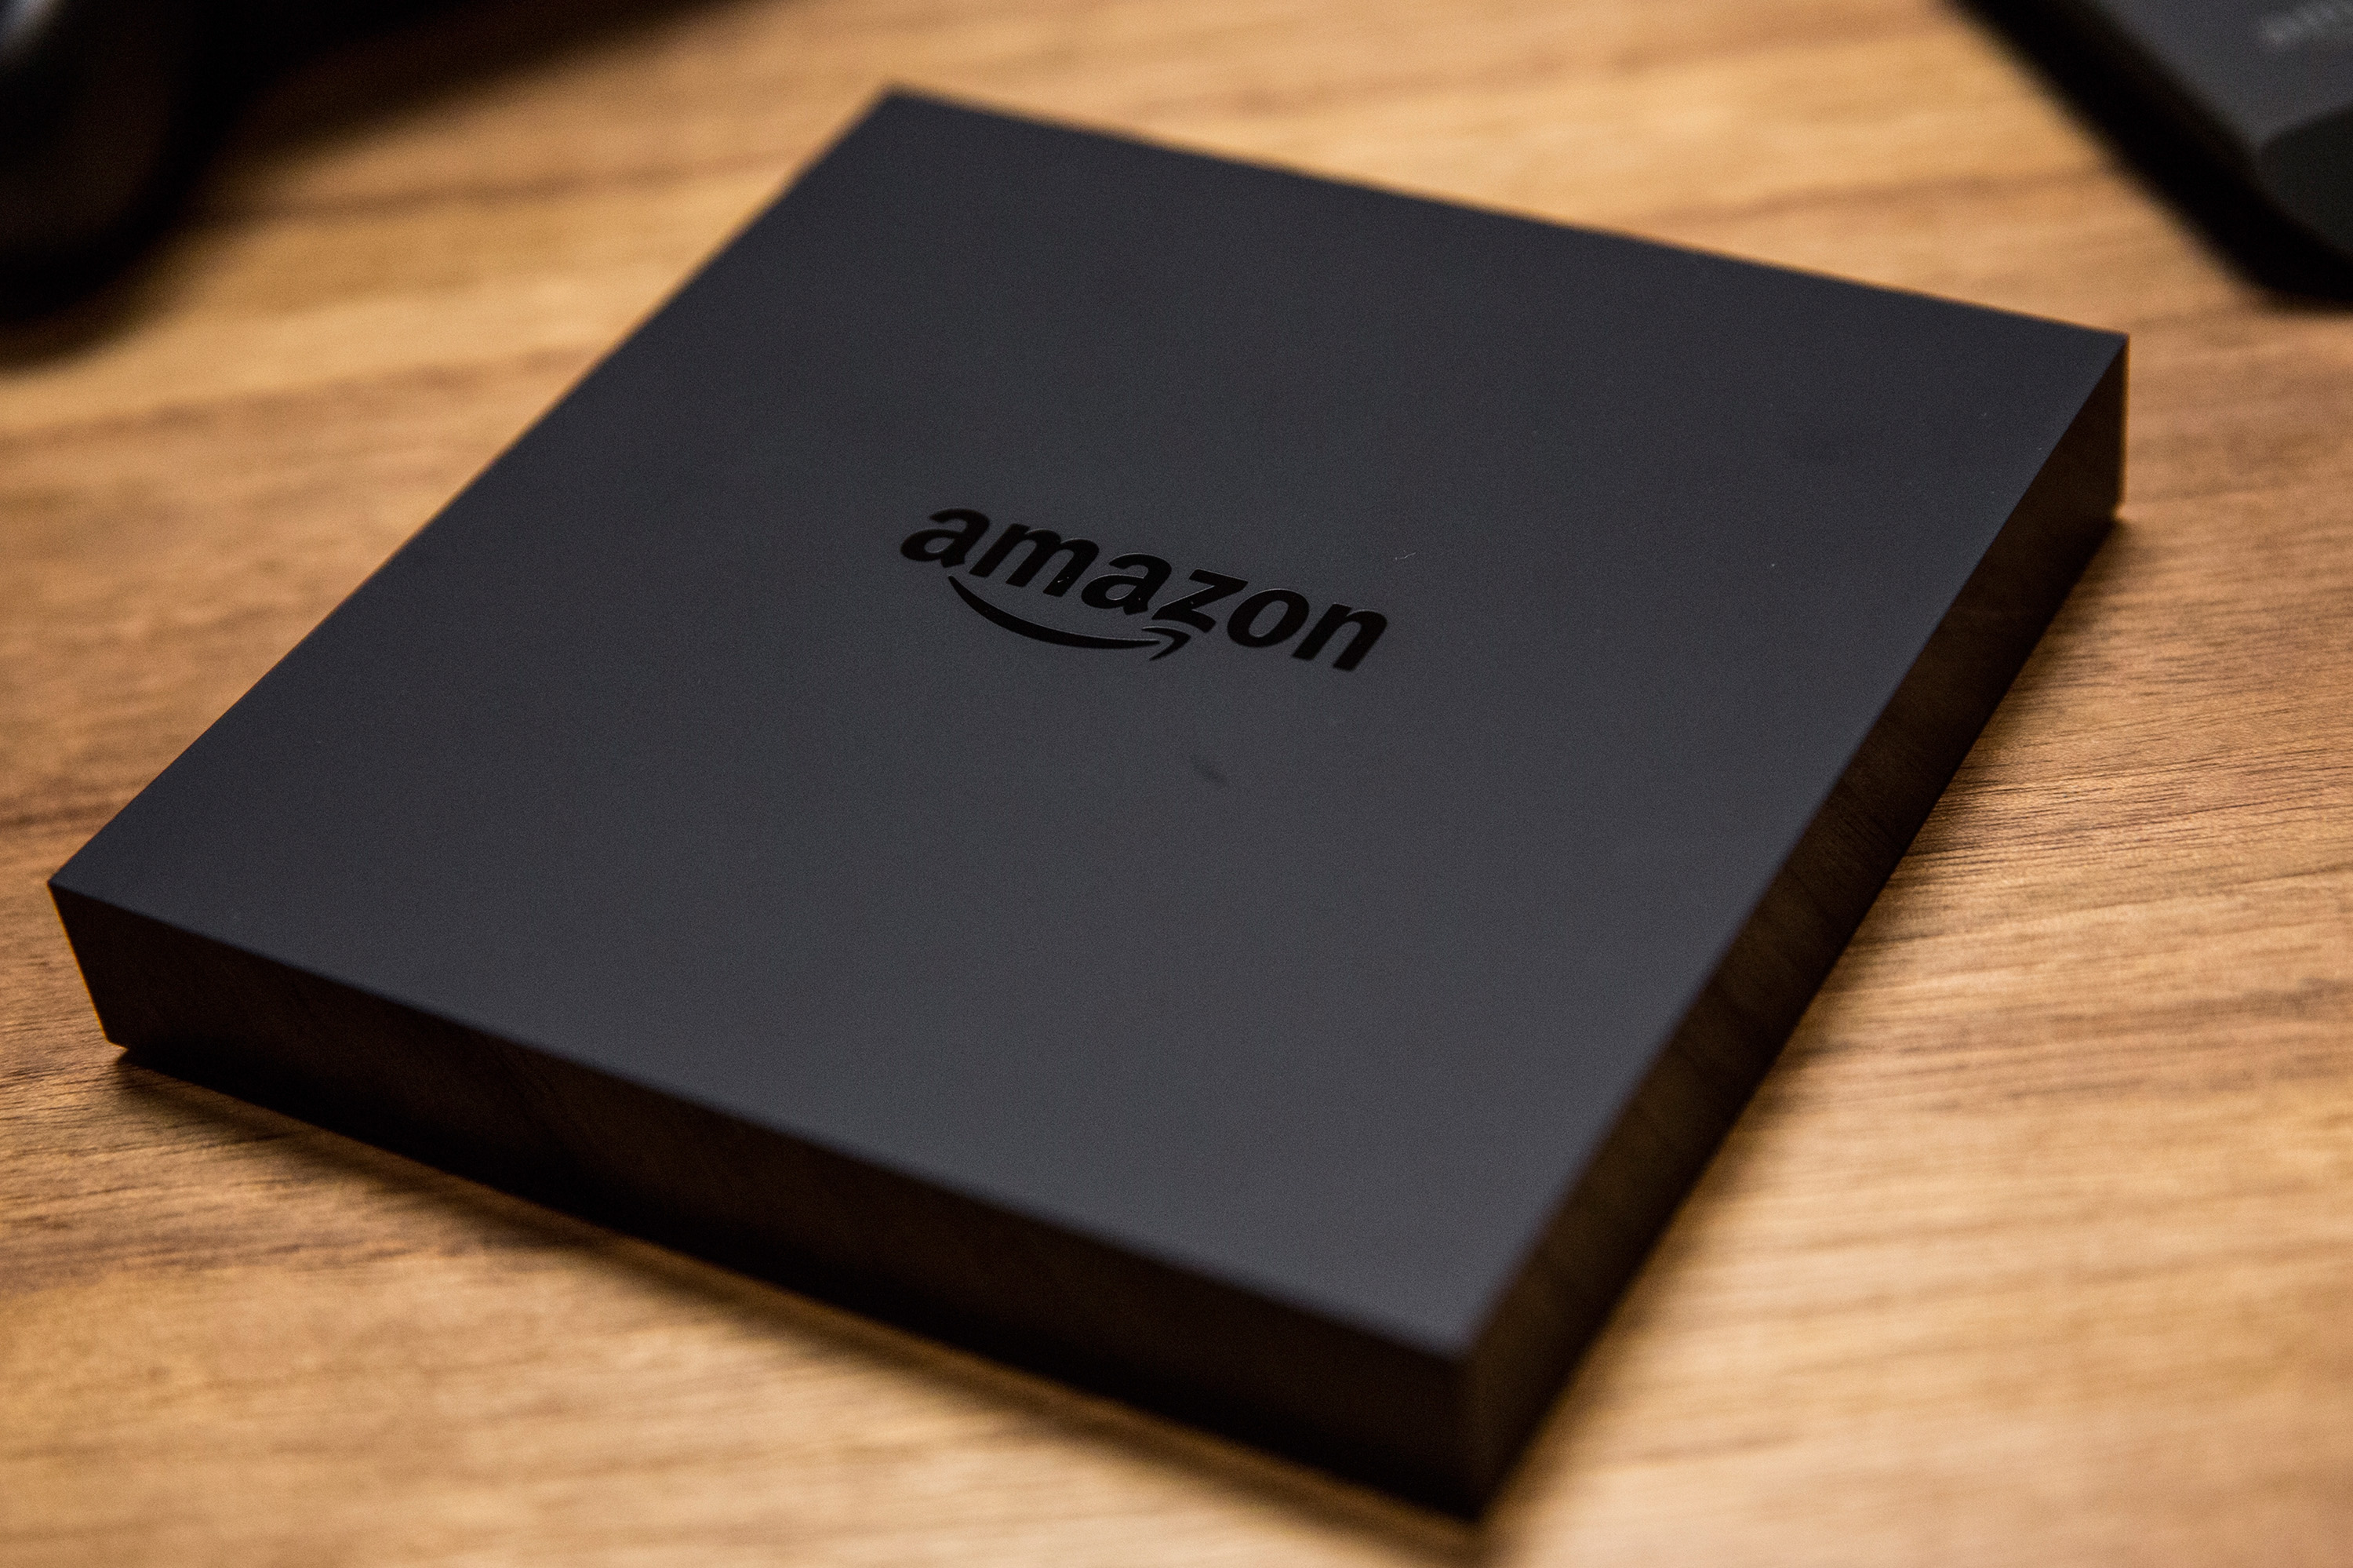 The Amazon Fire TV - a new device that allows users to stream video, music, photos, games and more through a television - is displayed at a media event on April 2, 2014 in New York City. (Andrew Burton&mdash;Getty Images)